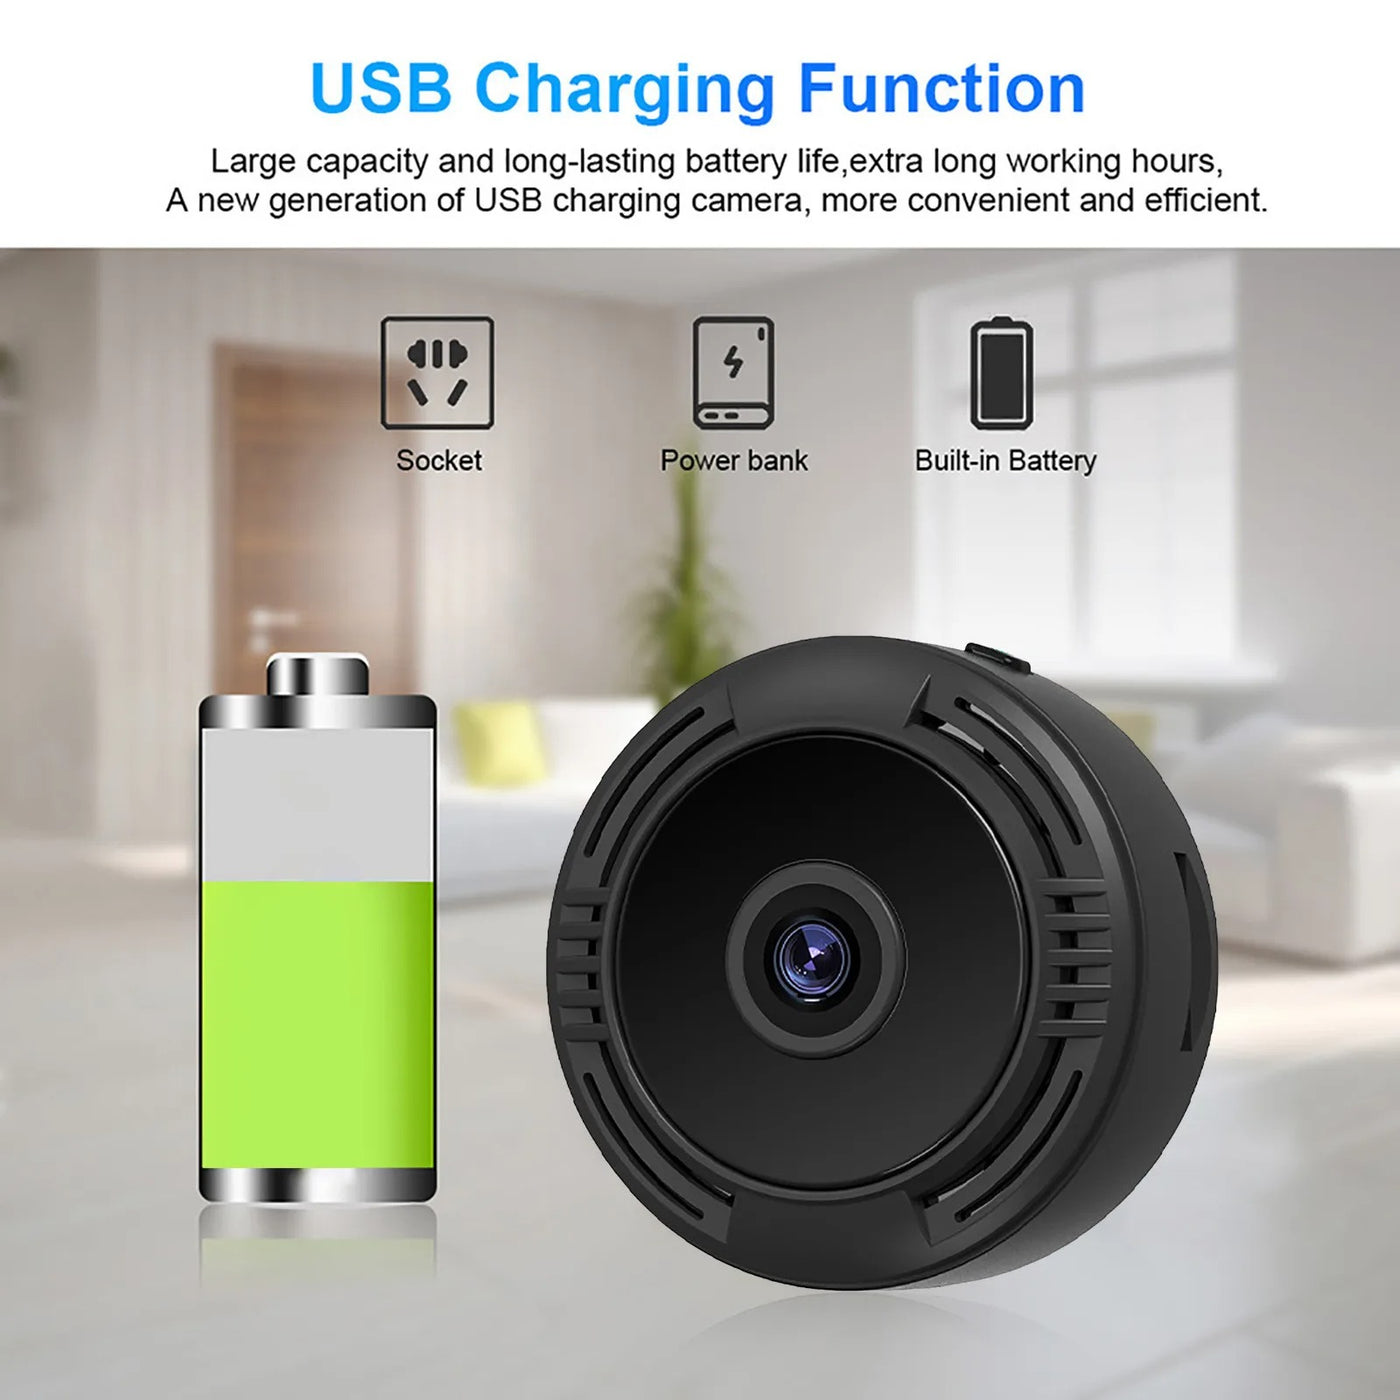 WiFi Mini Indoor 1080p Battery CameraBuilt-In Battery Can Work For 30 Minutes. This Wireless Hidden Camera Has Own Wifi Hotspot, It Can Also Connect Your Mobile Phone Without Router Wifi.Battery Type: BWiFi Mini Indoor 1080p Battery CameraZam Zam Store